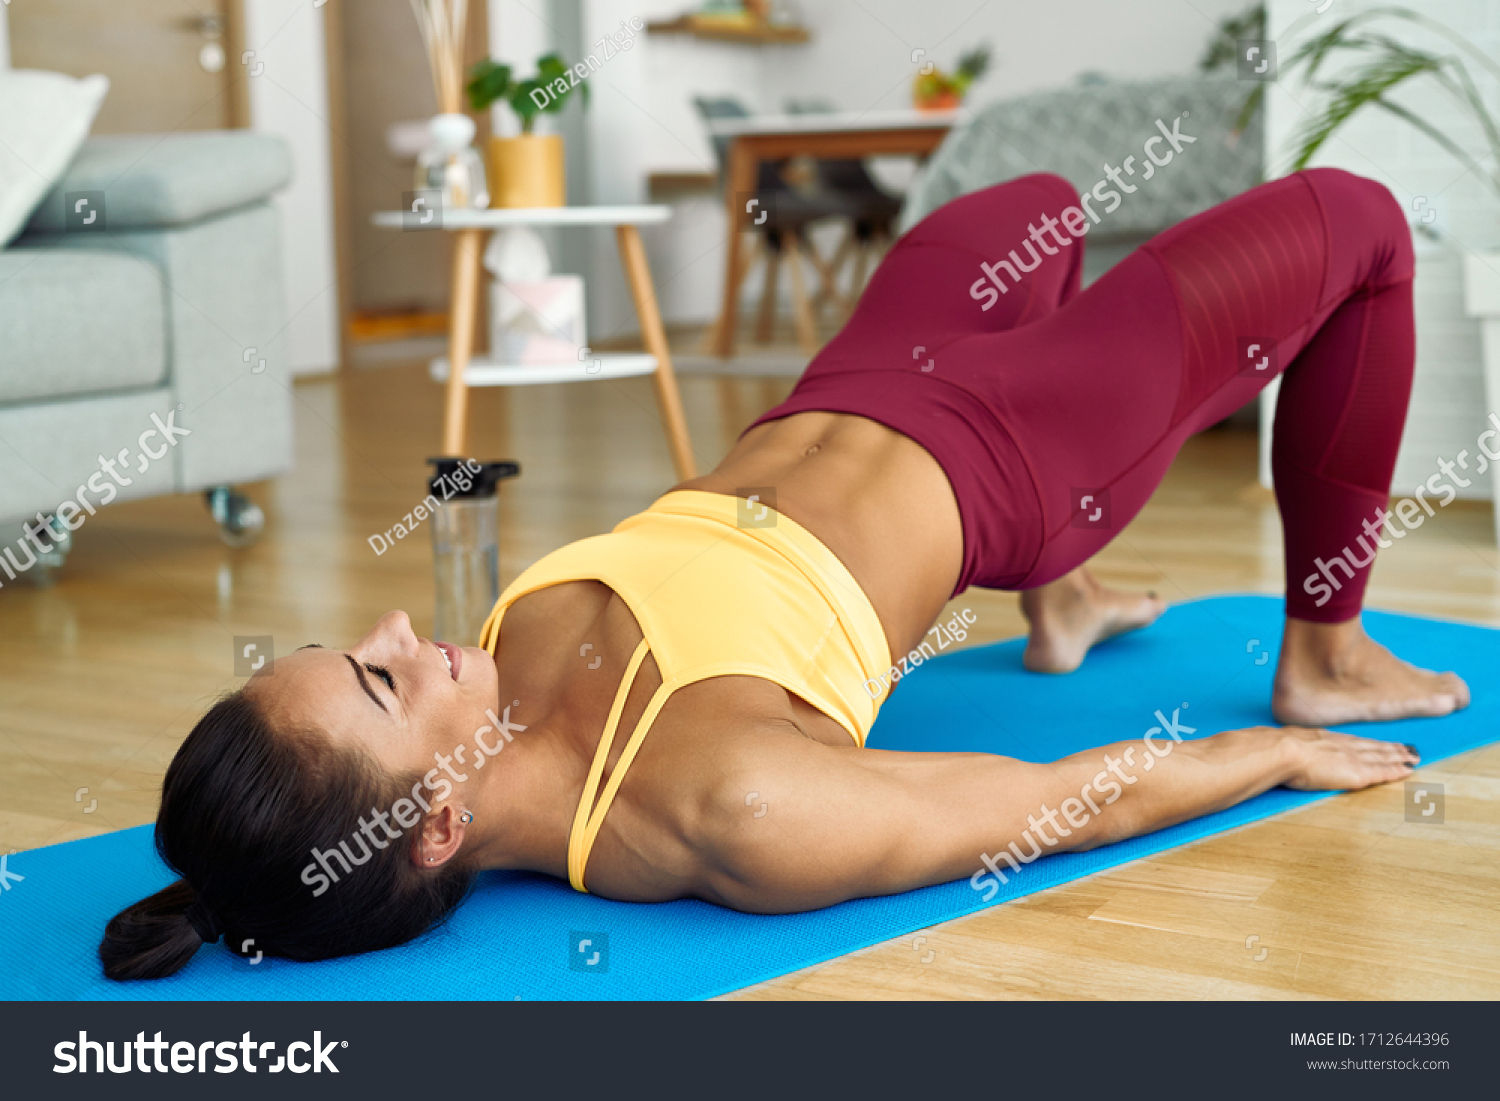 Young athletic woman lifting her hips while doing glute bridge exercise on the floor at home.  #1712644396